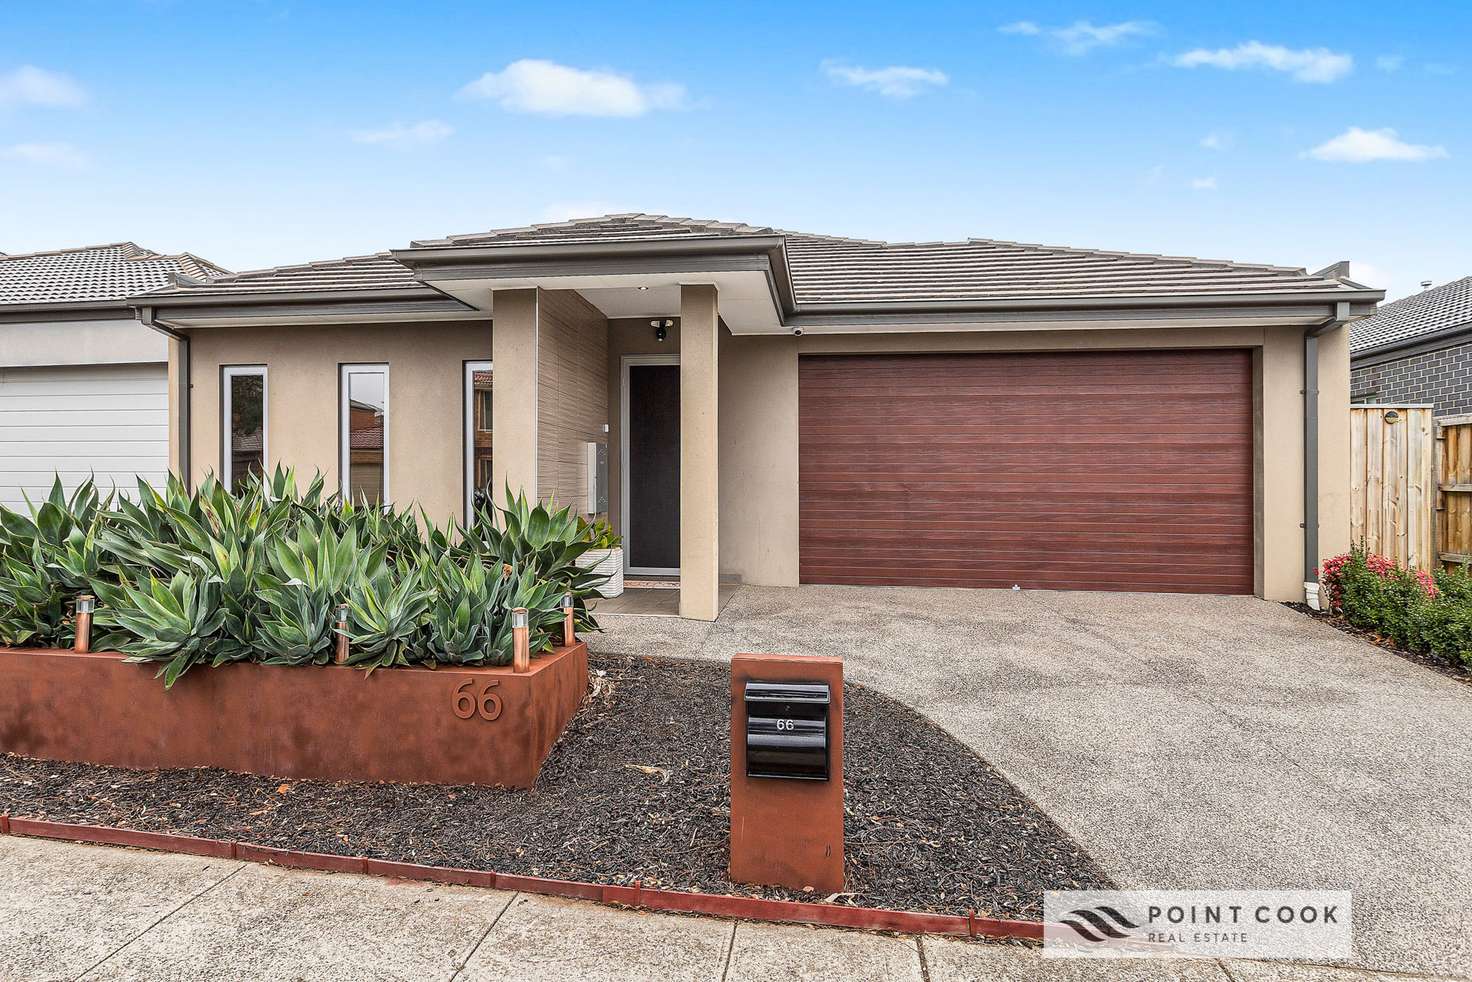 Main view of Homely house listing, 66 Cooinda Way, Point Cook VIC 3030